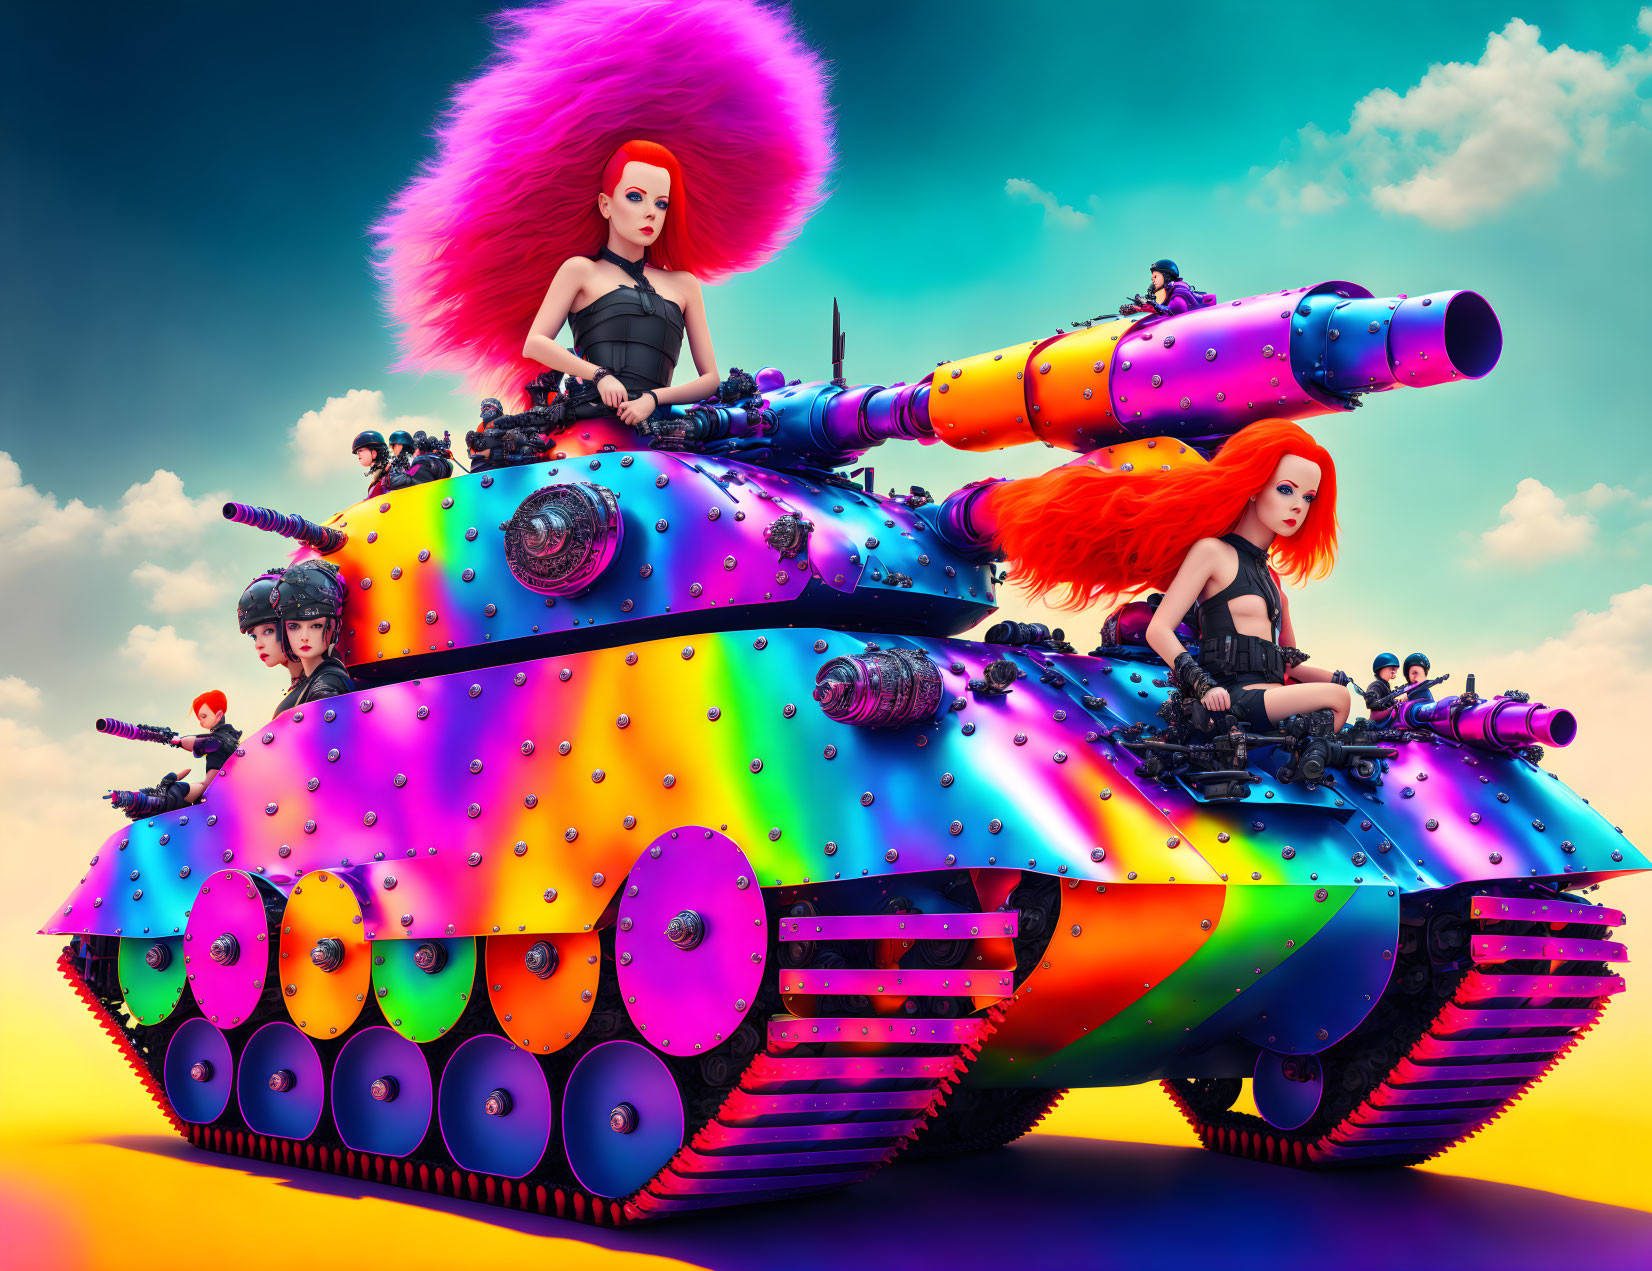 Colorful illustration: Two women with red hair on psychedelic tank under gradient sky